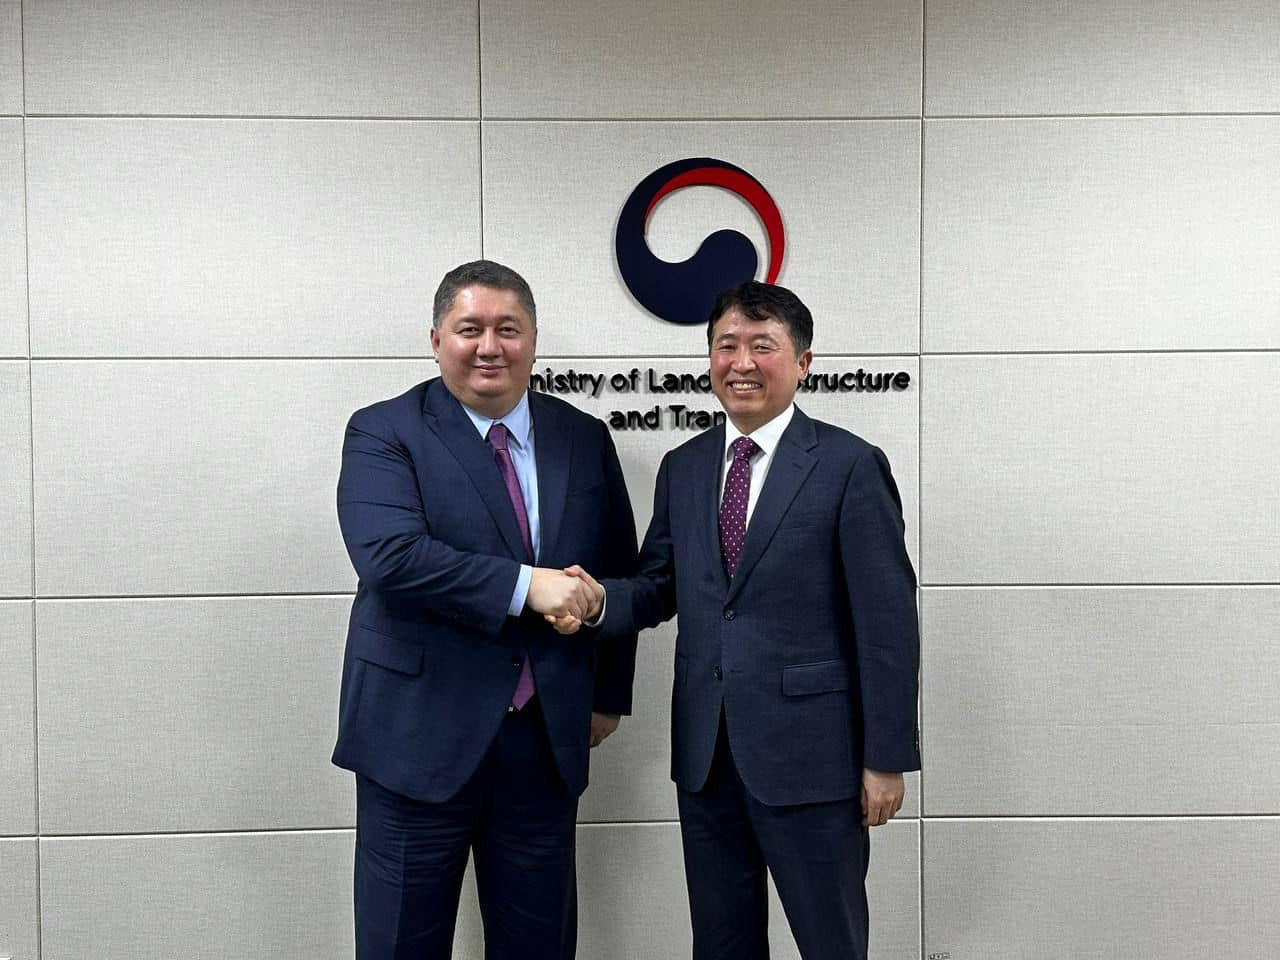 Kazakh Vice Minister of Transport Talgat Lastayev(left) exchanges greetings with Deputy Minister of Lang, infrastructuree and Transport Lee Yoon-sang in Sejong City on February 19. (Kazakh Embassy in Seoul)